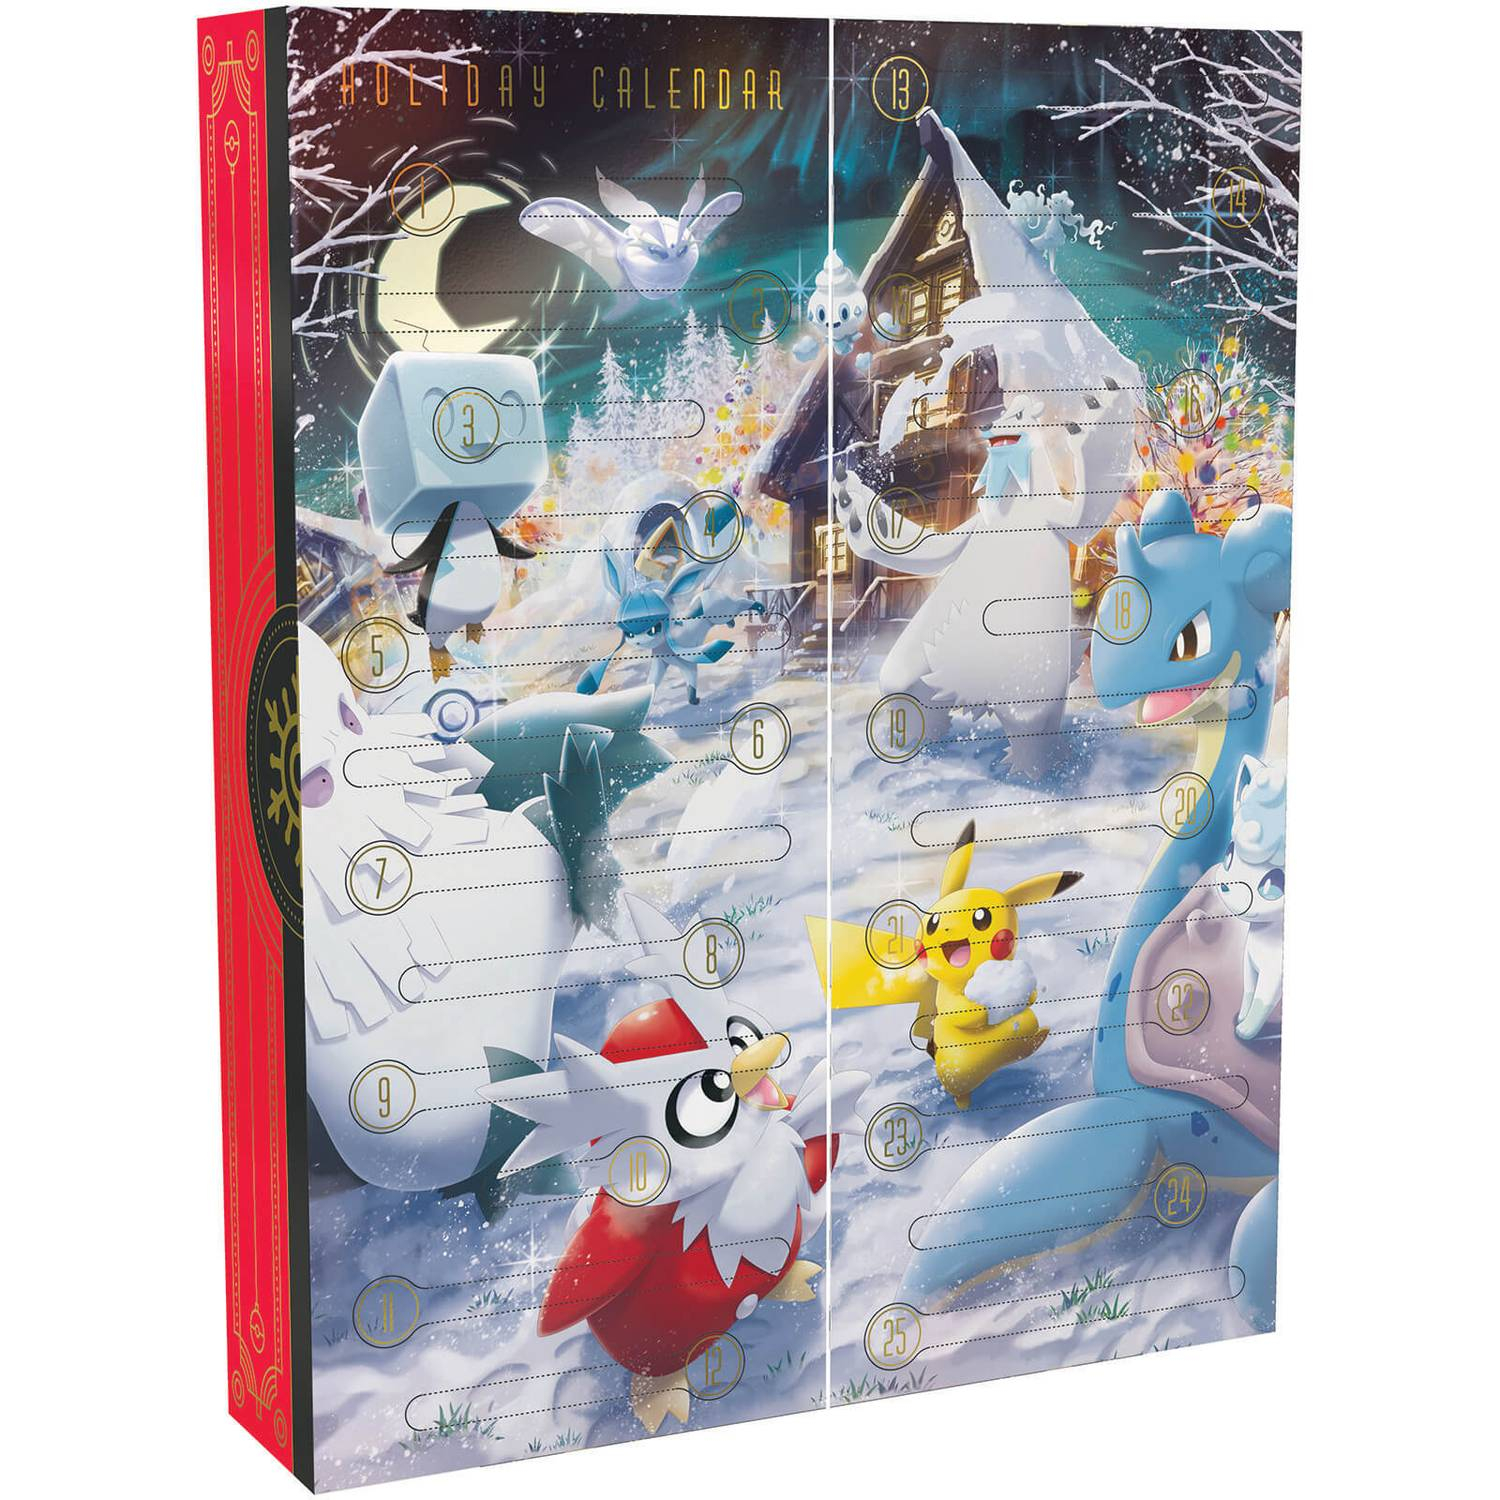 "Pokemon TCG Holiday Calendar" Promos and Contents Revealed